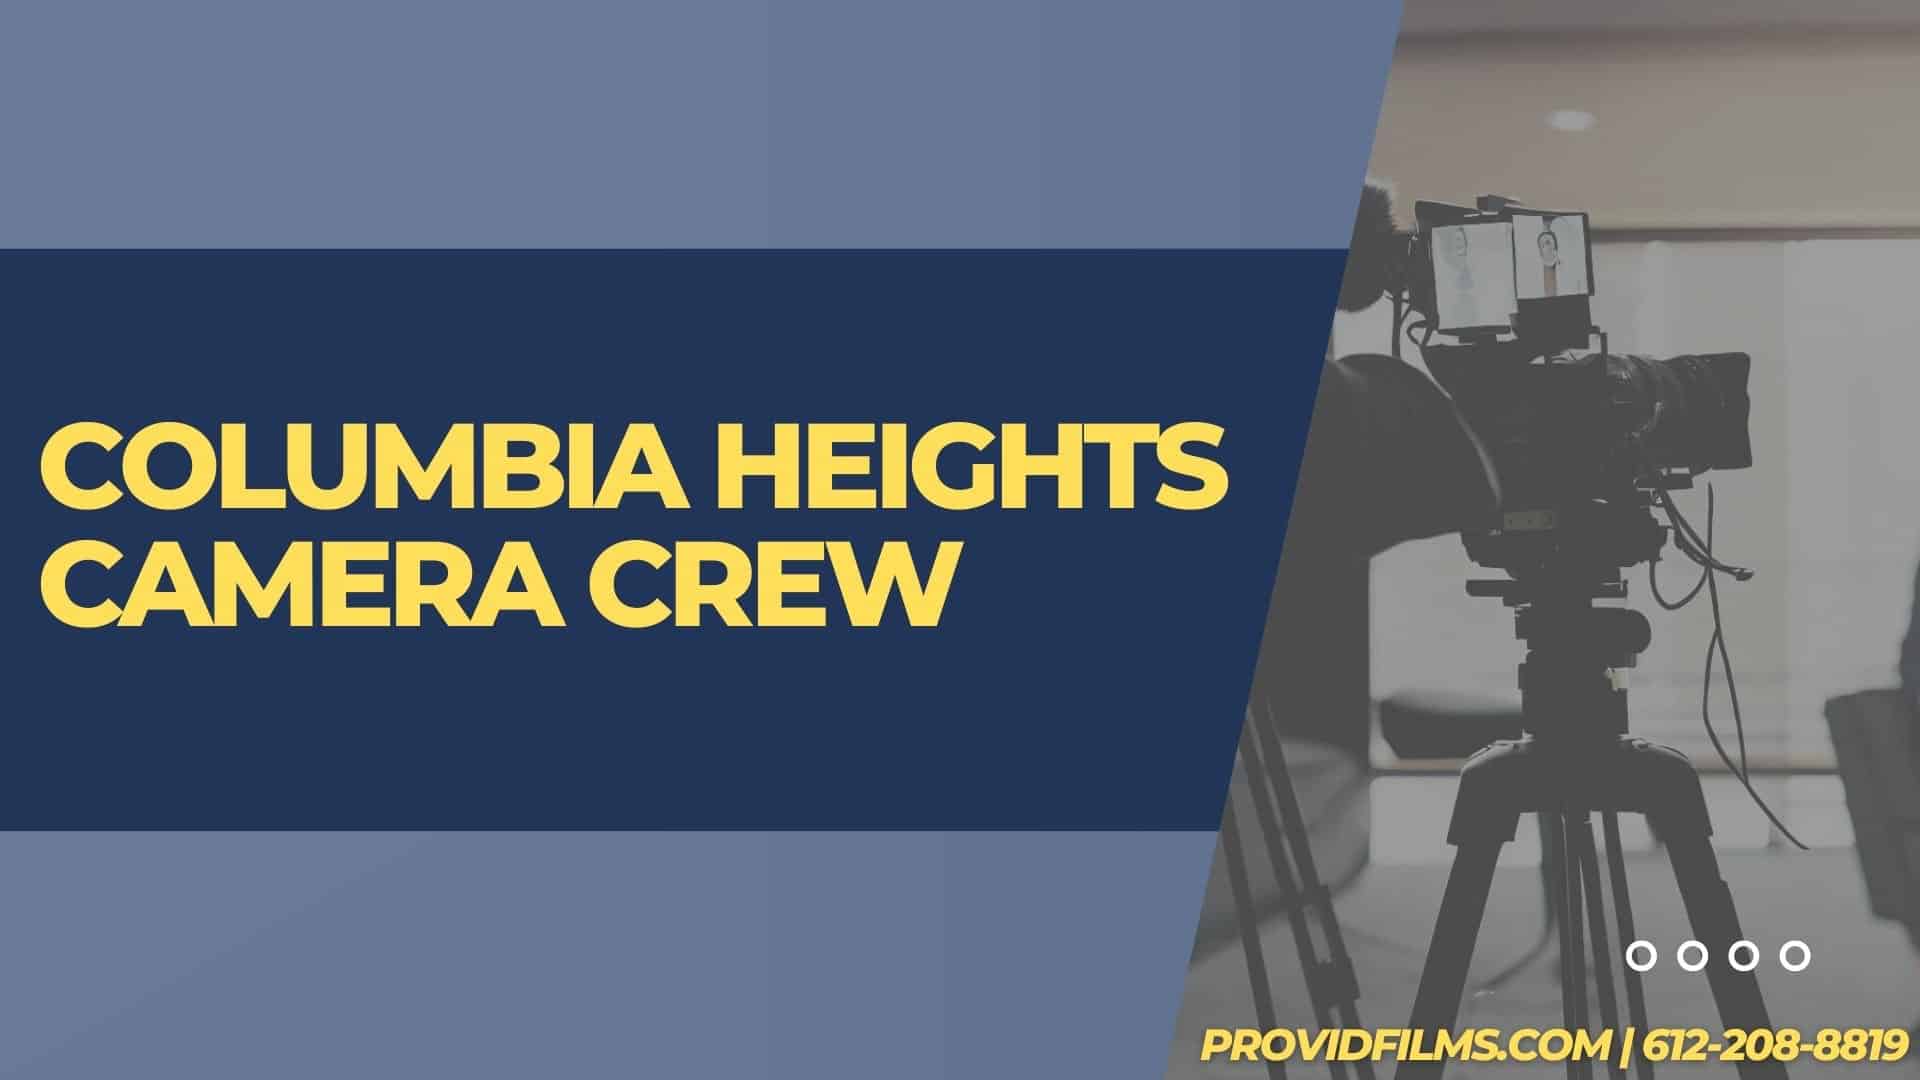 Graphic of a video camera with the text saying "Columbia Heights Camera Crew"